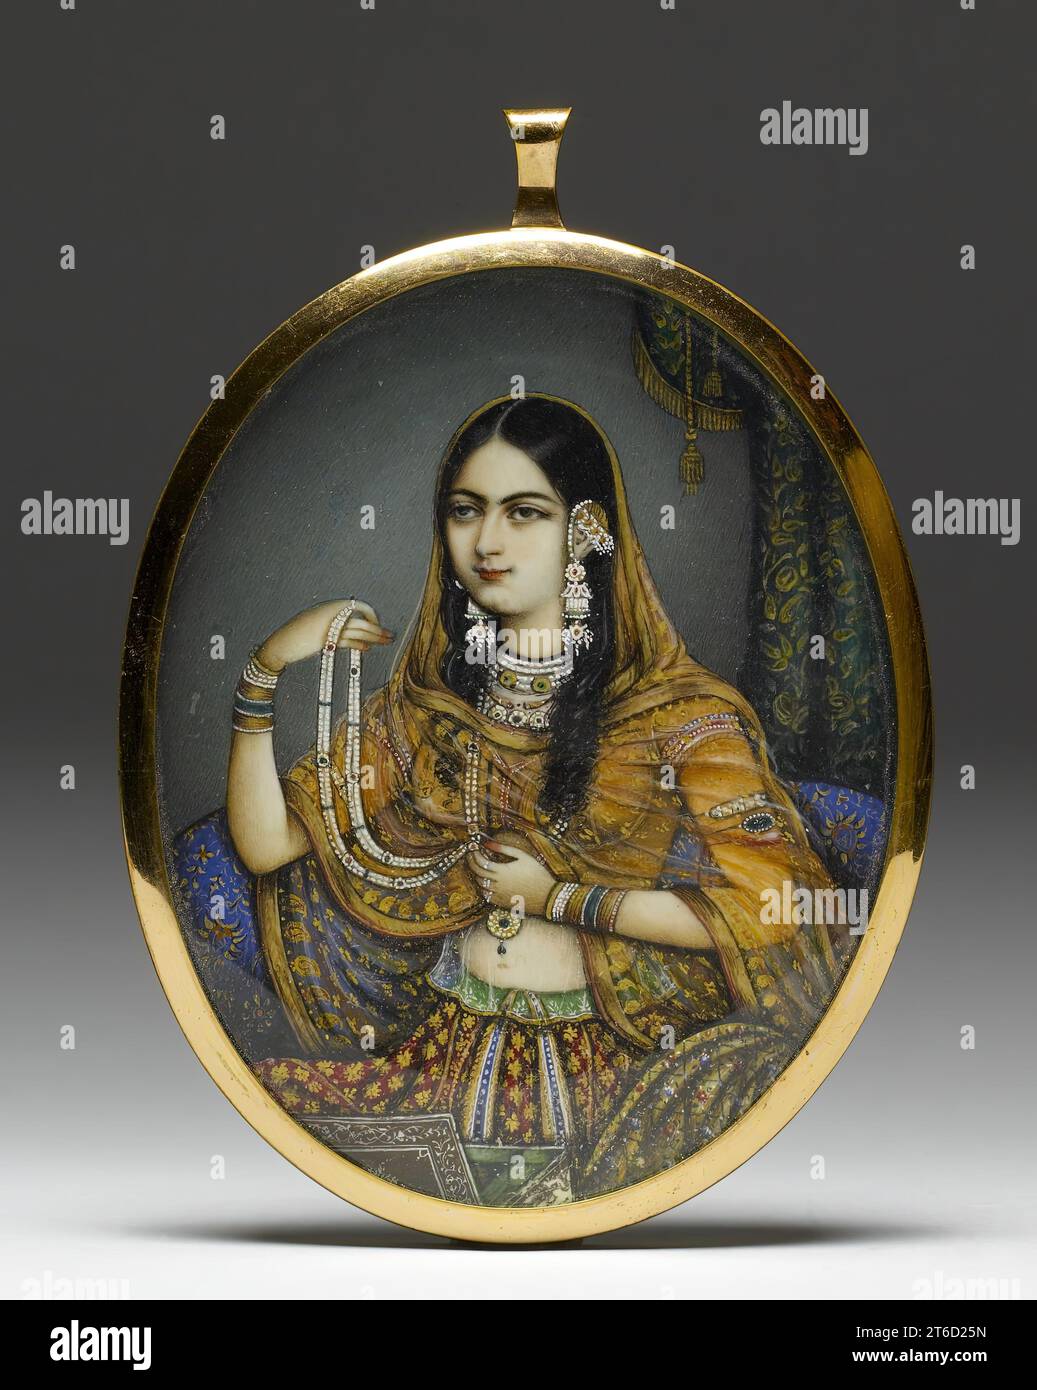 Portrait Miniature of an Indian Courtesan, 1830-1850. English artists visited India to paint both large-scale and miniature portraits of those serving abroad as mementos for friends and families back in the Mother Country. They introduced the European technique of painting in watercolours on ivory to the local artists. In this instance, an artist from Delhi has portrayed a courtesan dressed as a princess wearing elaborate Mughal gold and gem-set jewelry. Stock Photo